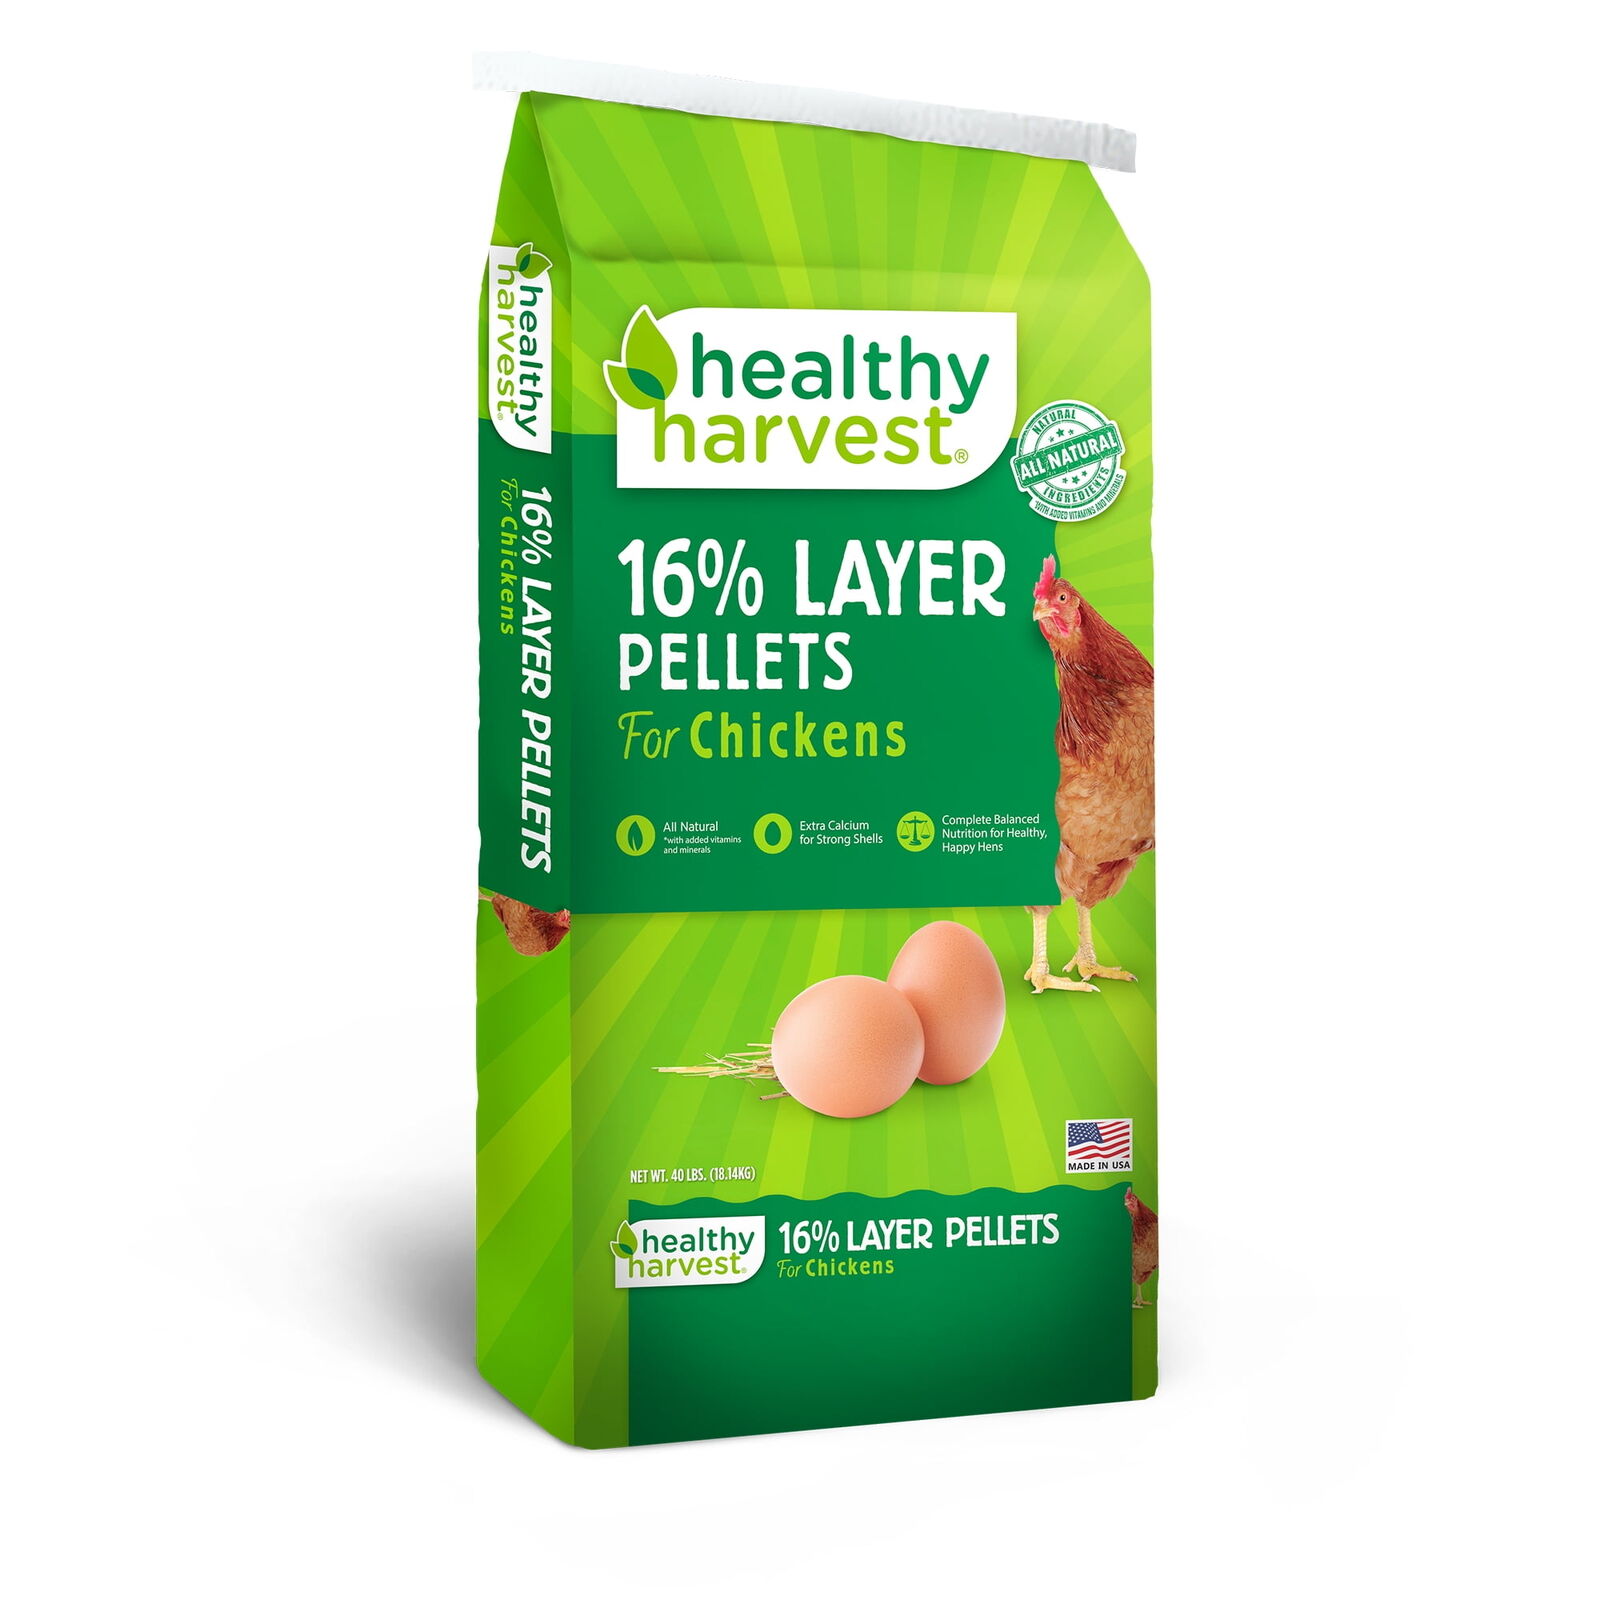 Healthy Harvest Laying Chickens, 40 lb bag,new